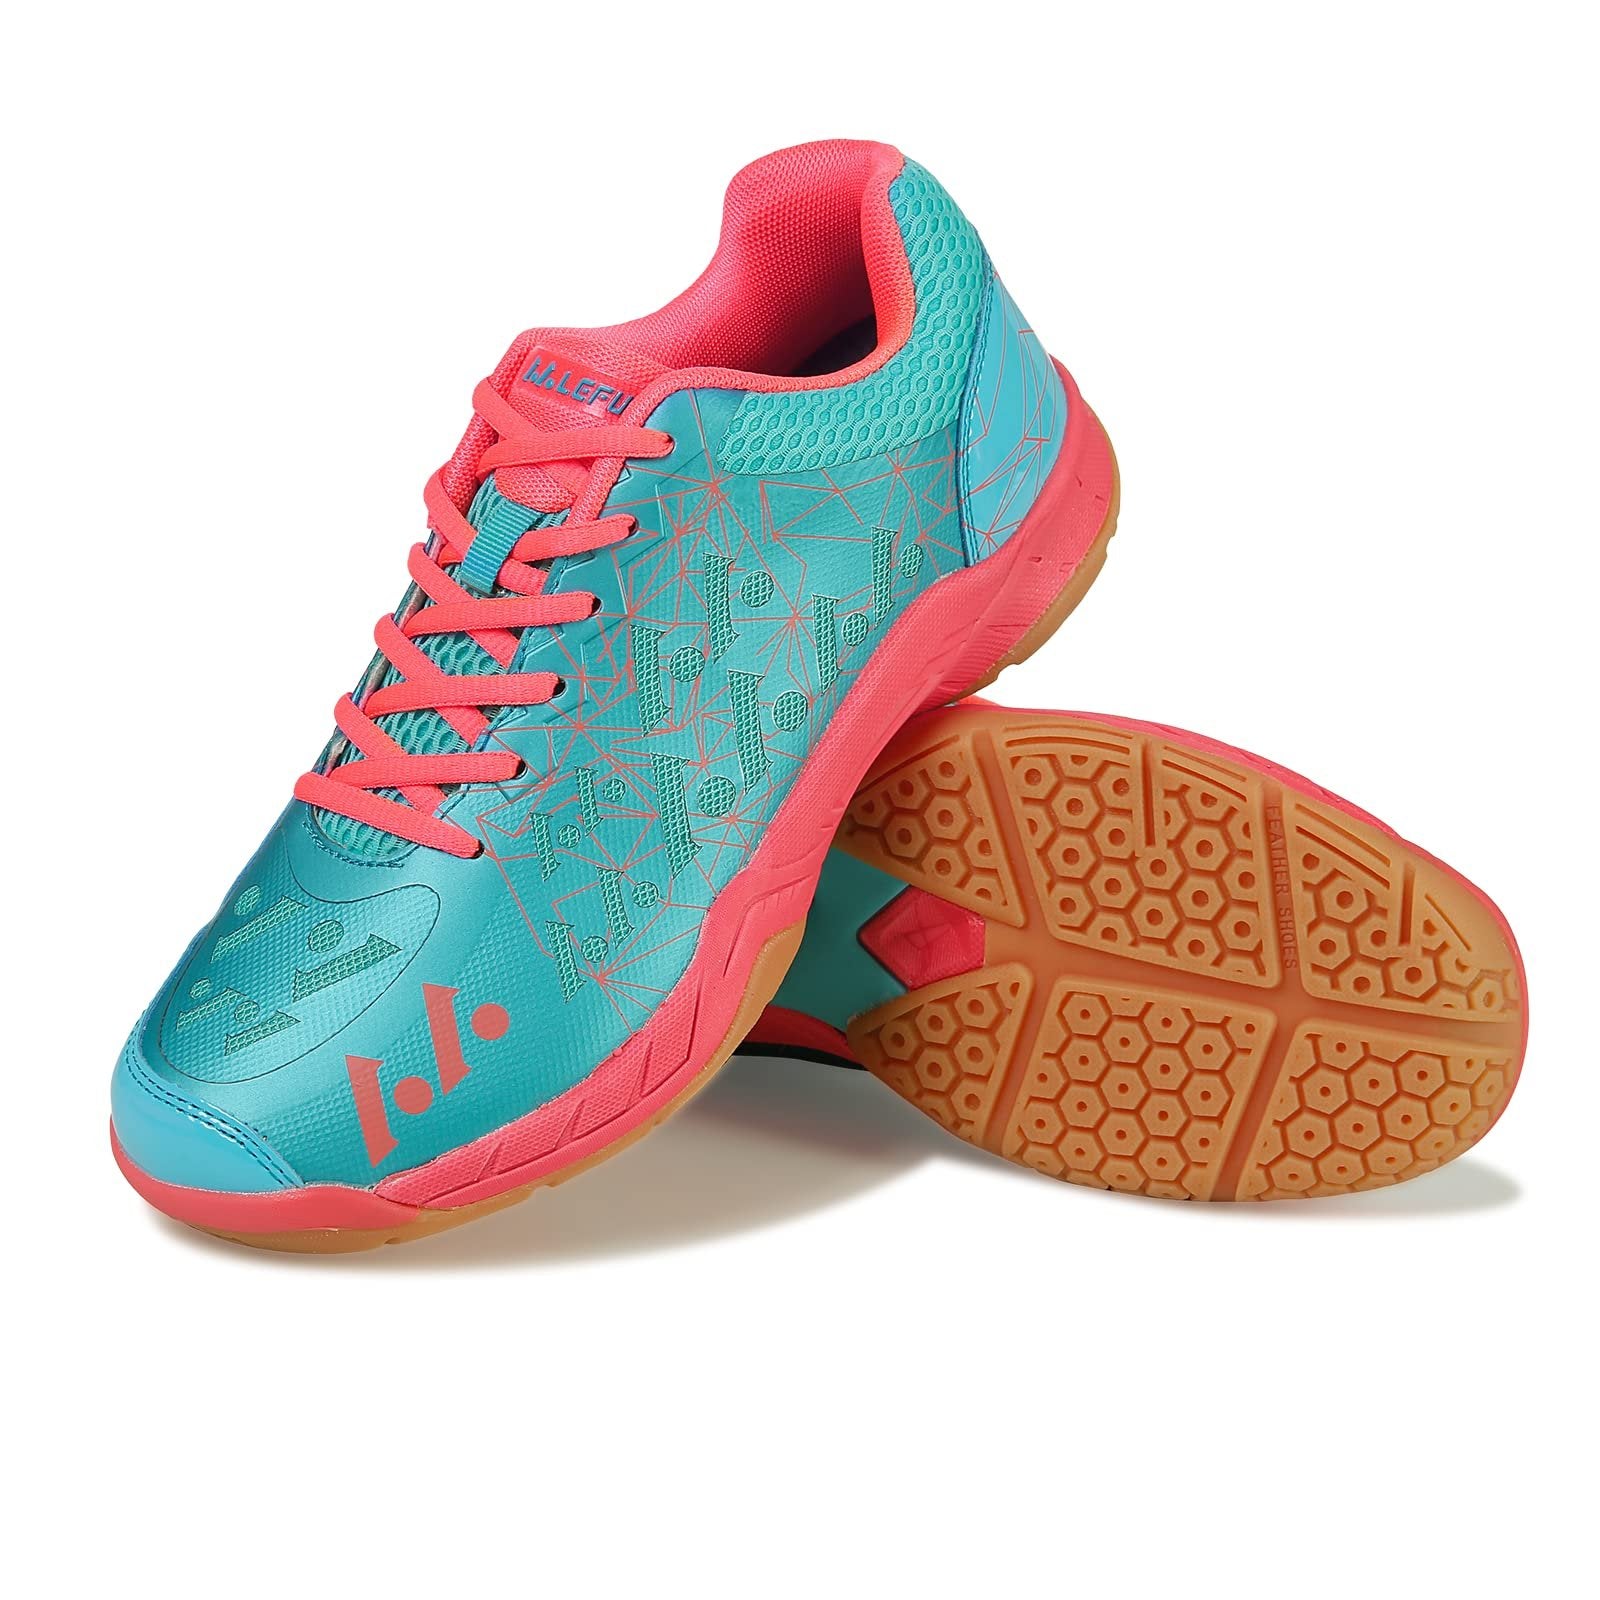 Condromly Women's Luff 06 Lightweight Cushioning Pickleball Court Shoes (06 Pink, 8)